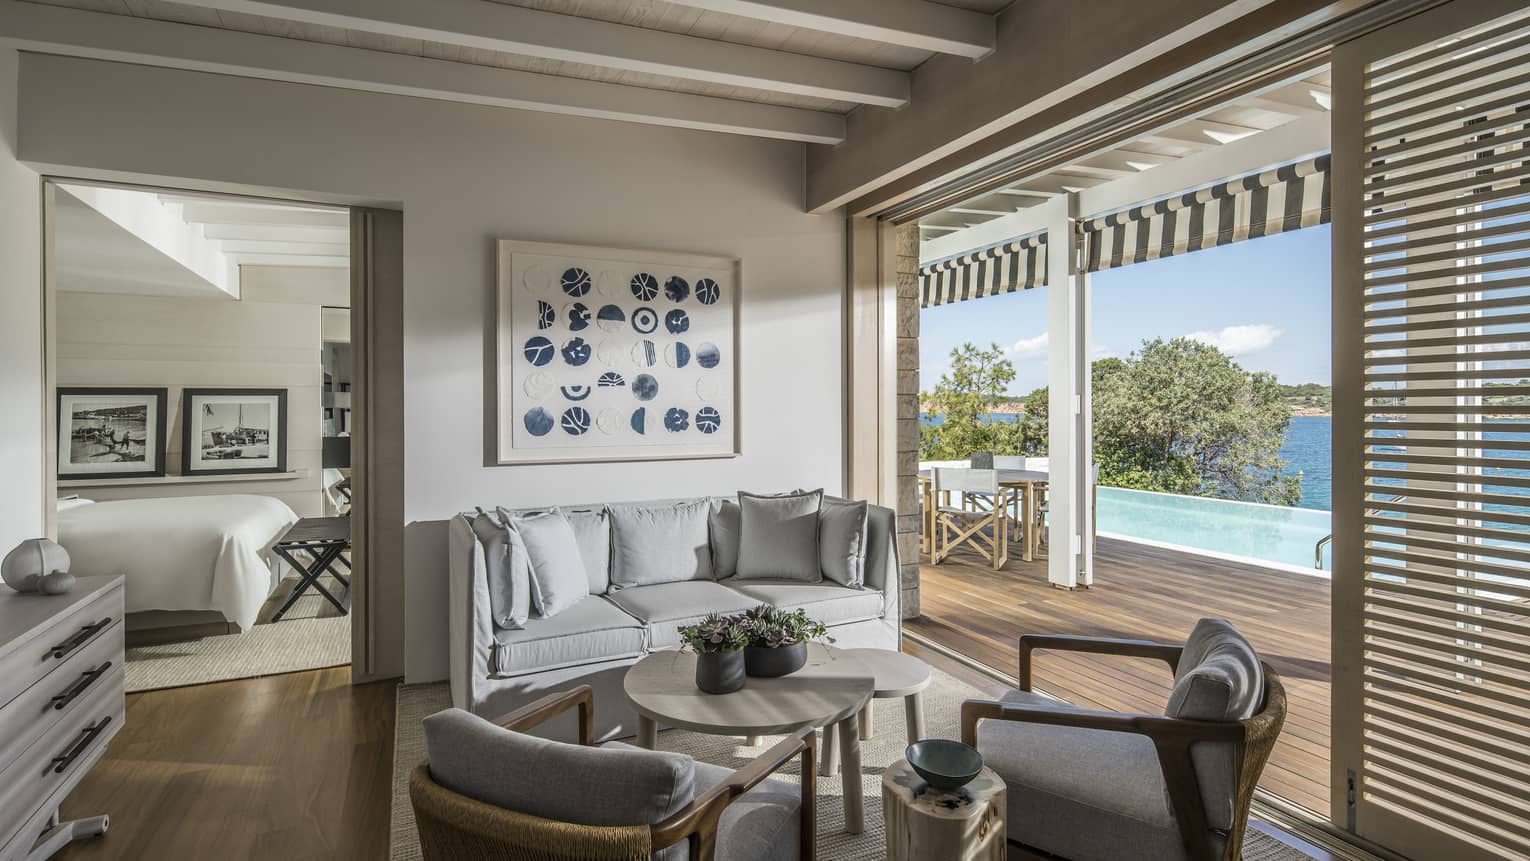 Living area with three-seat grey sofa and two arm chairs opens up to private deck with pool